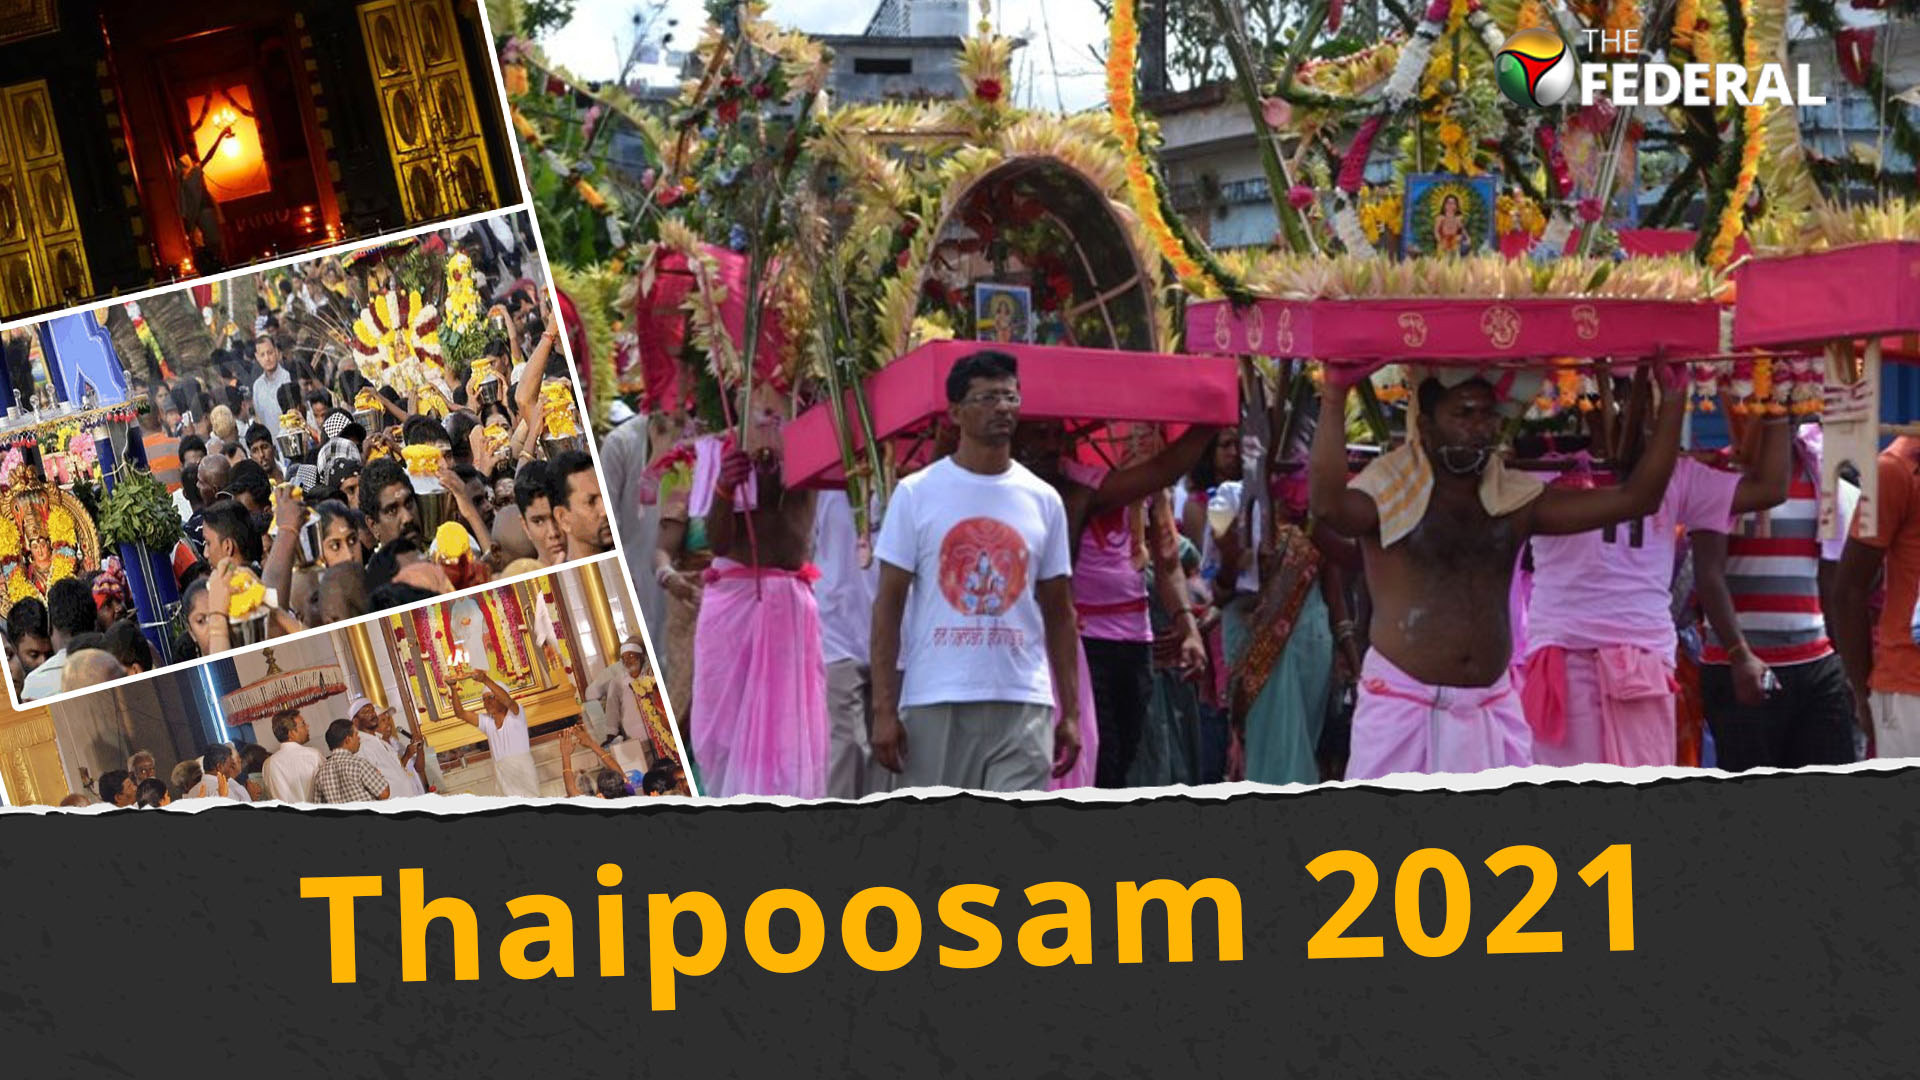 Thaipoosams additional significance this year, its the 150th anniversary of Jothi Dharshan